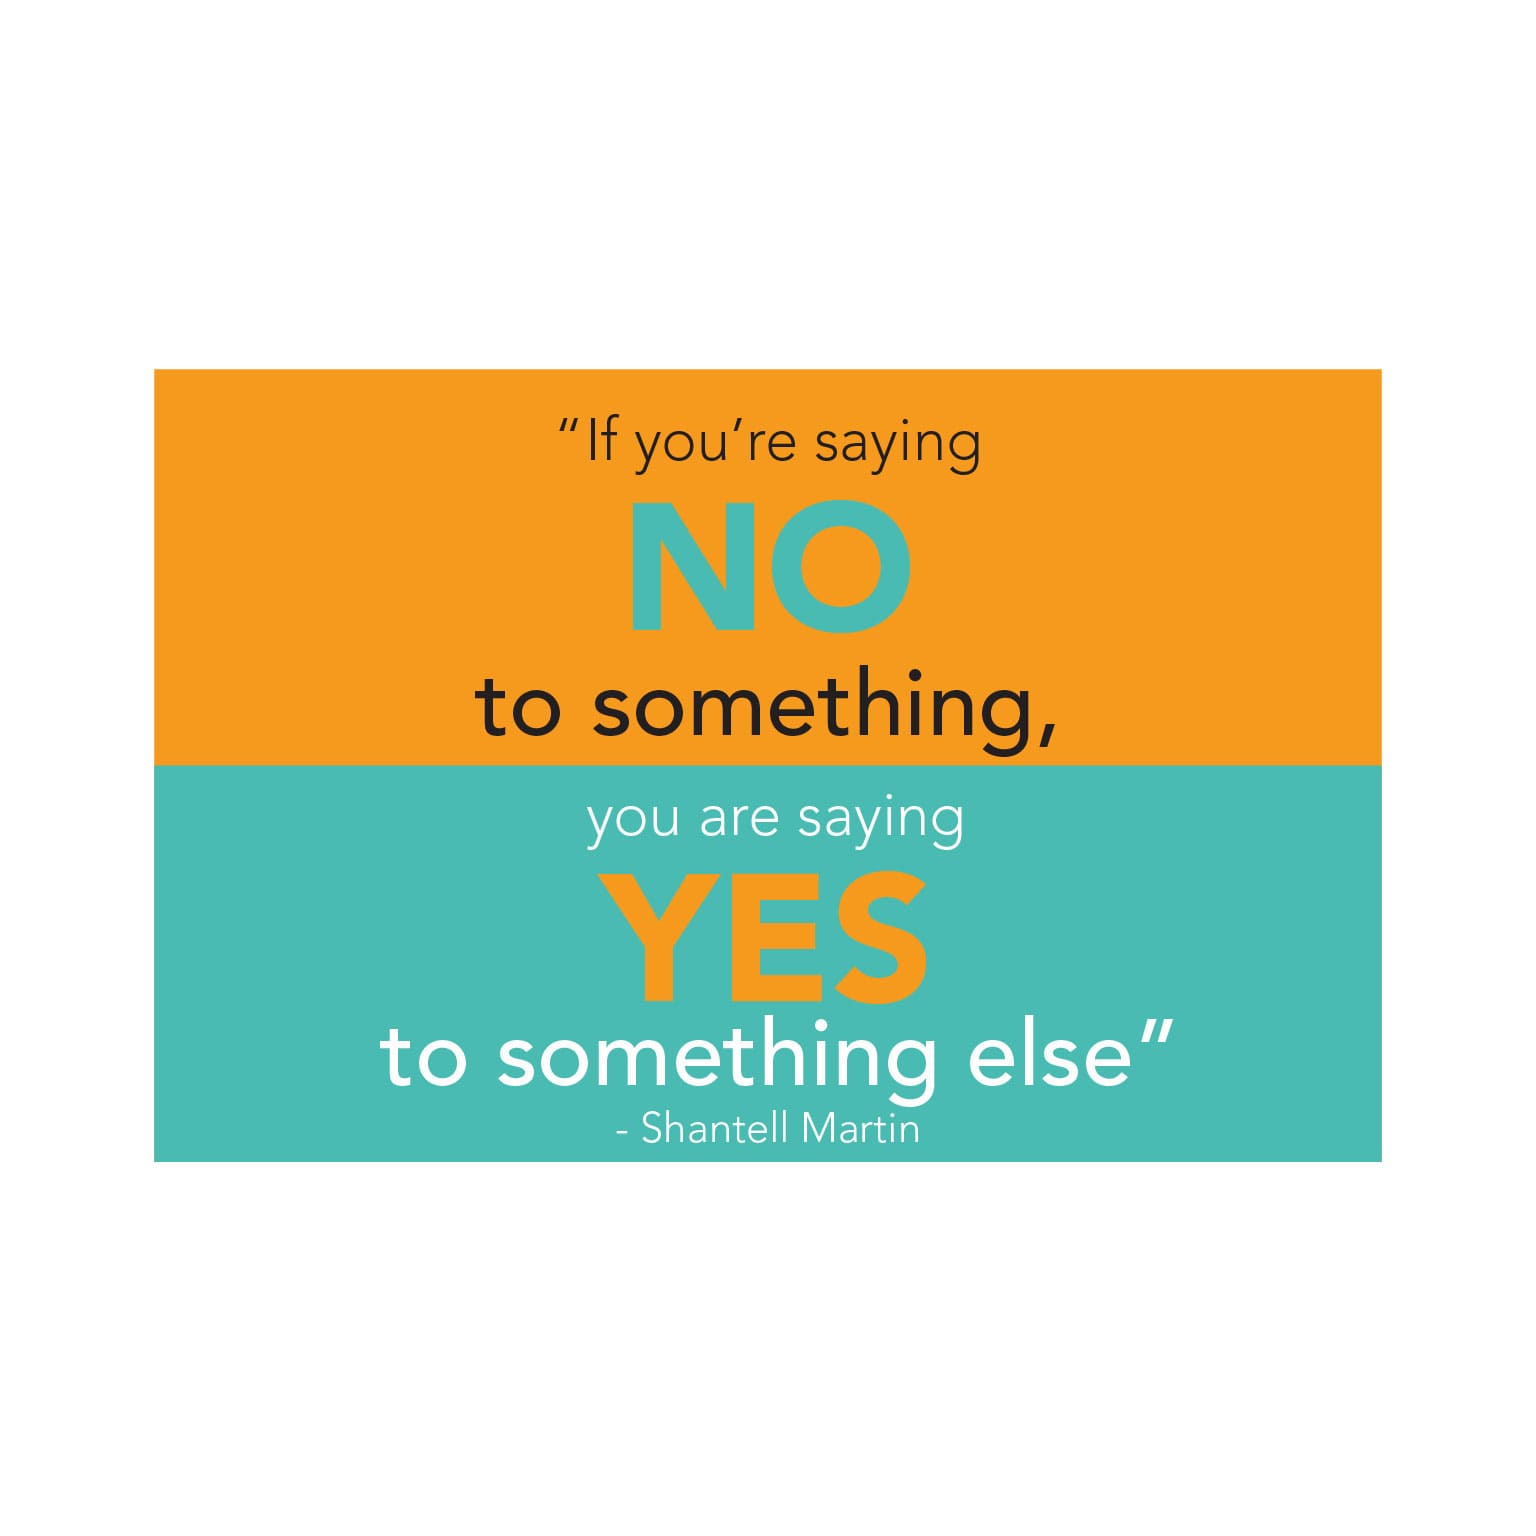 if you are saying no to something, you are saying yes to something else